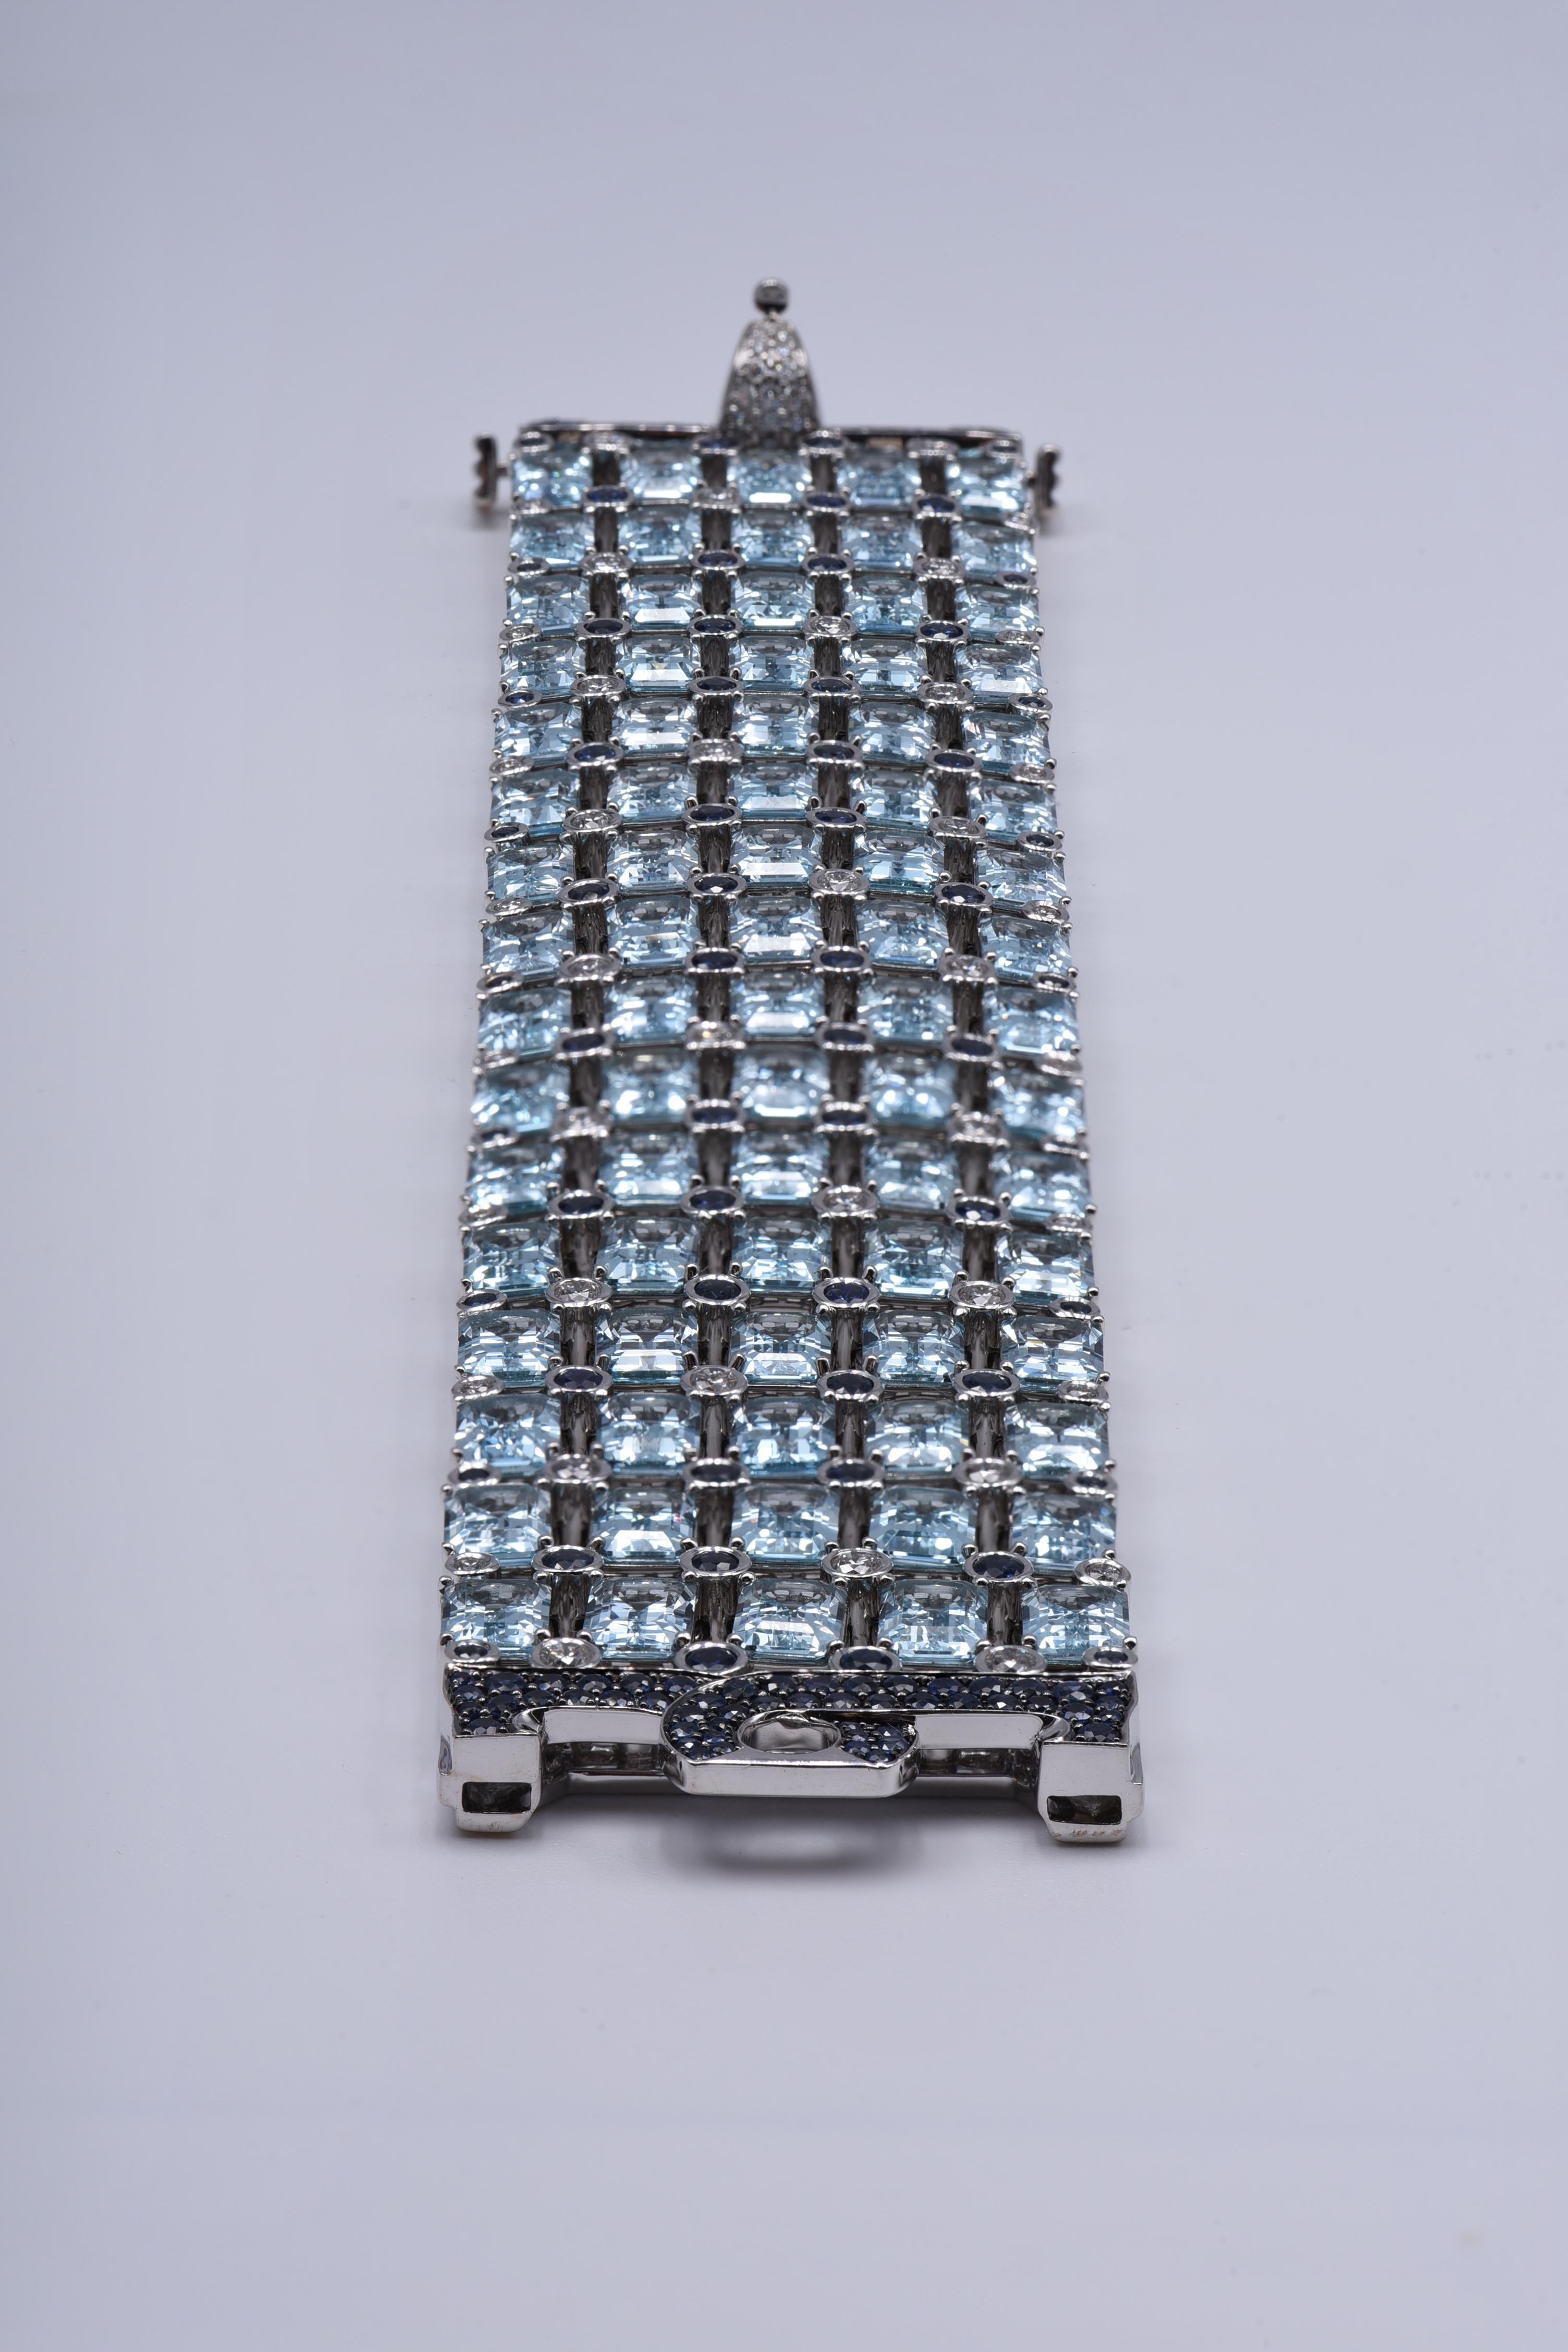 Bracelet in 18KT white gold with white diamonds (approx. 2.31 carats), blue sapphires (approx. 5.47 carats), and blue topaz (approx. 80.31 carats)